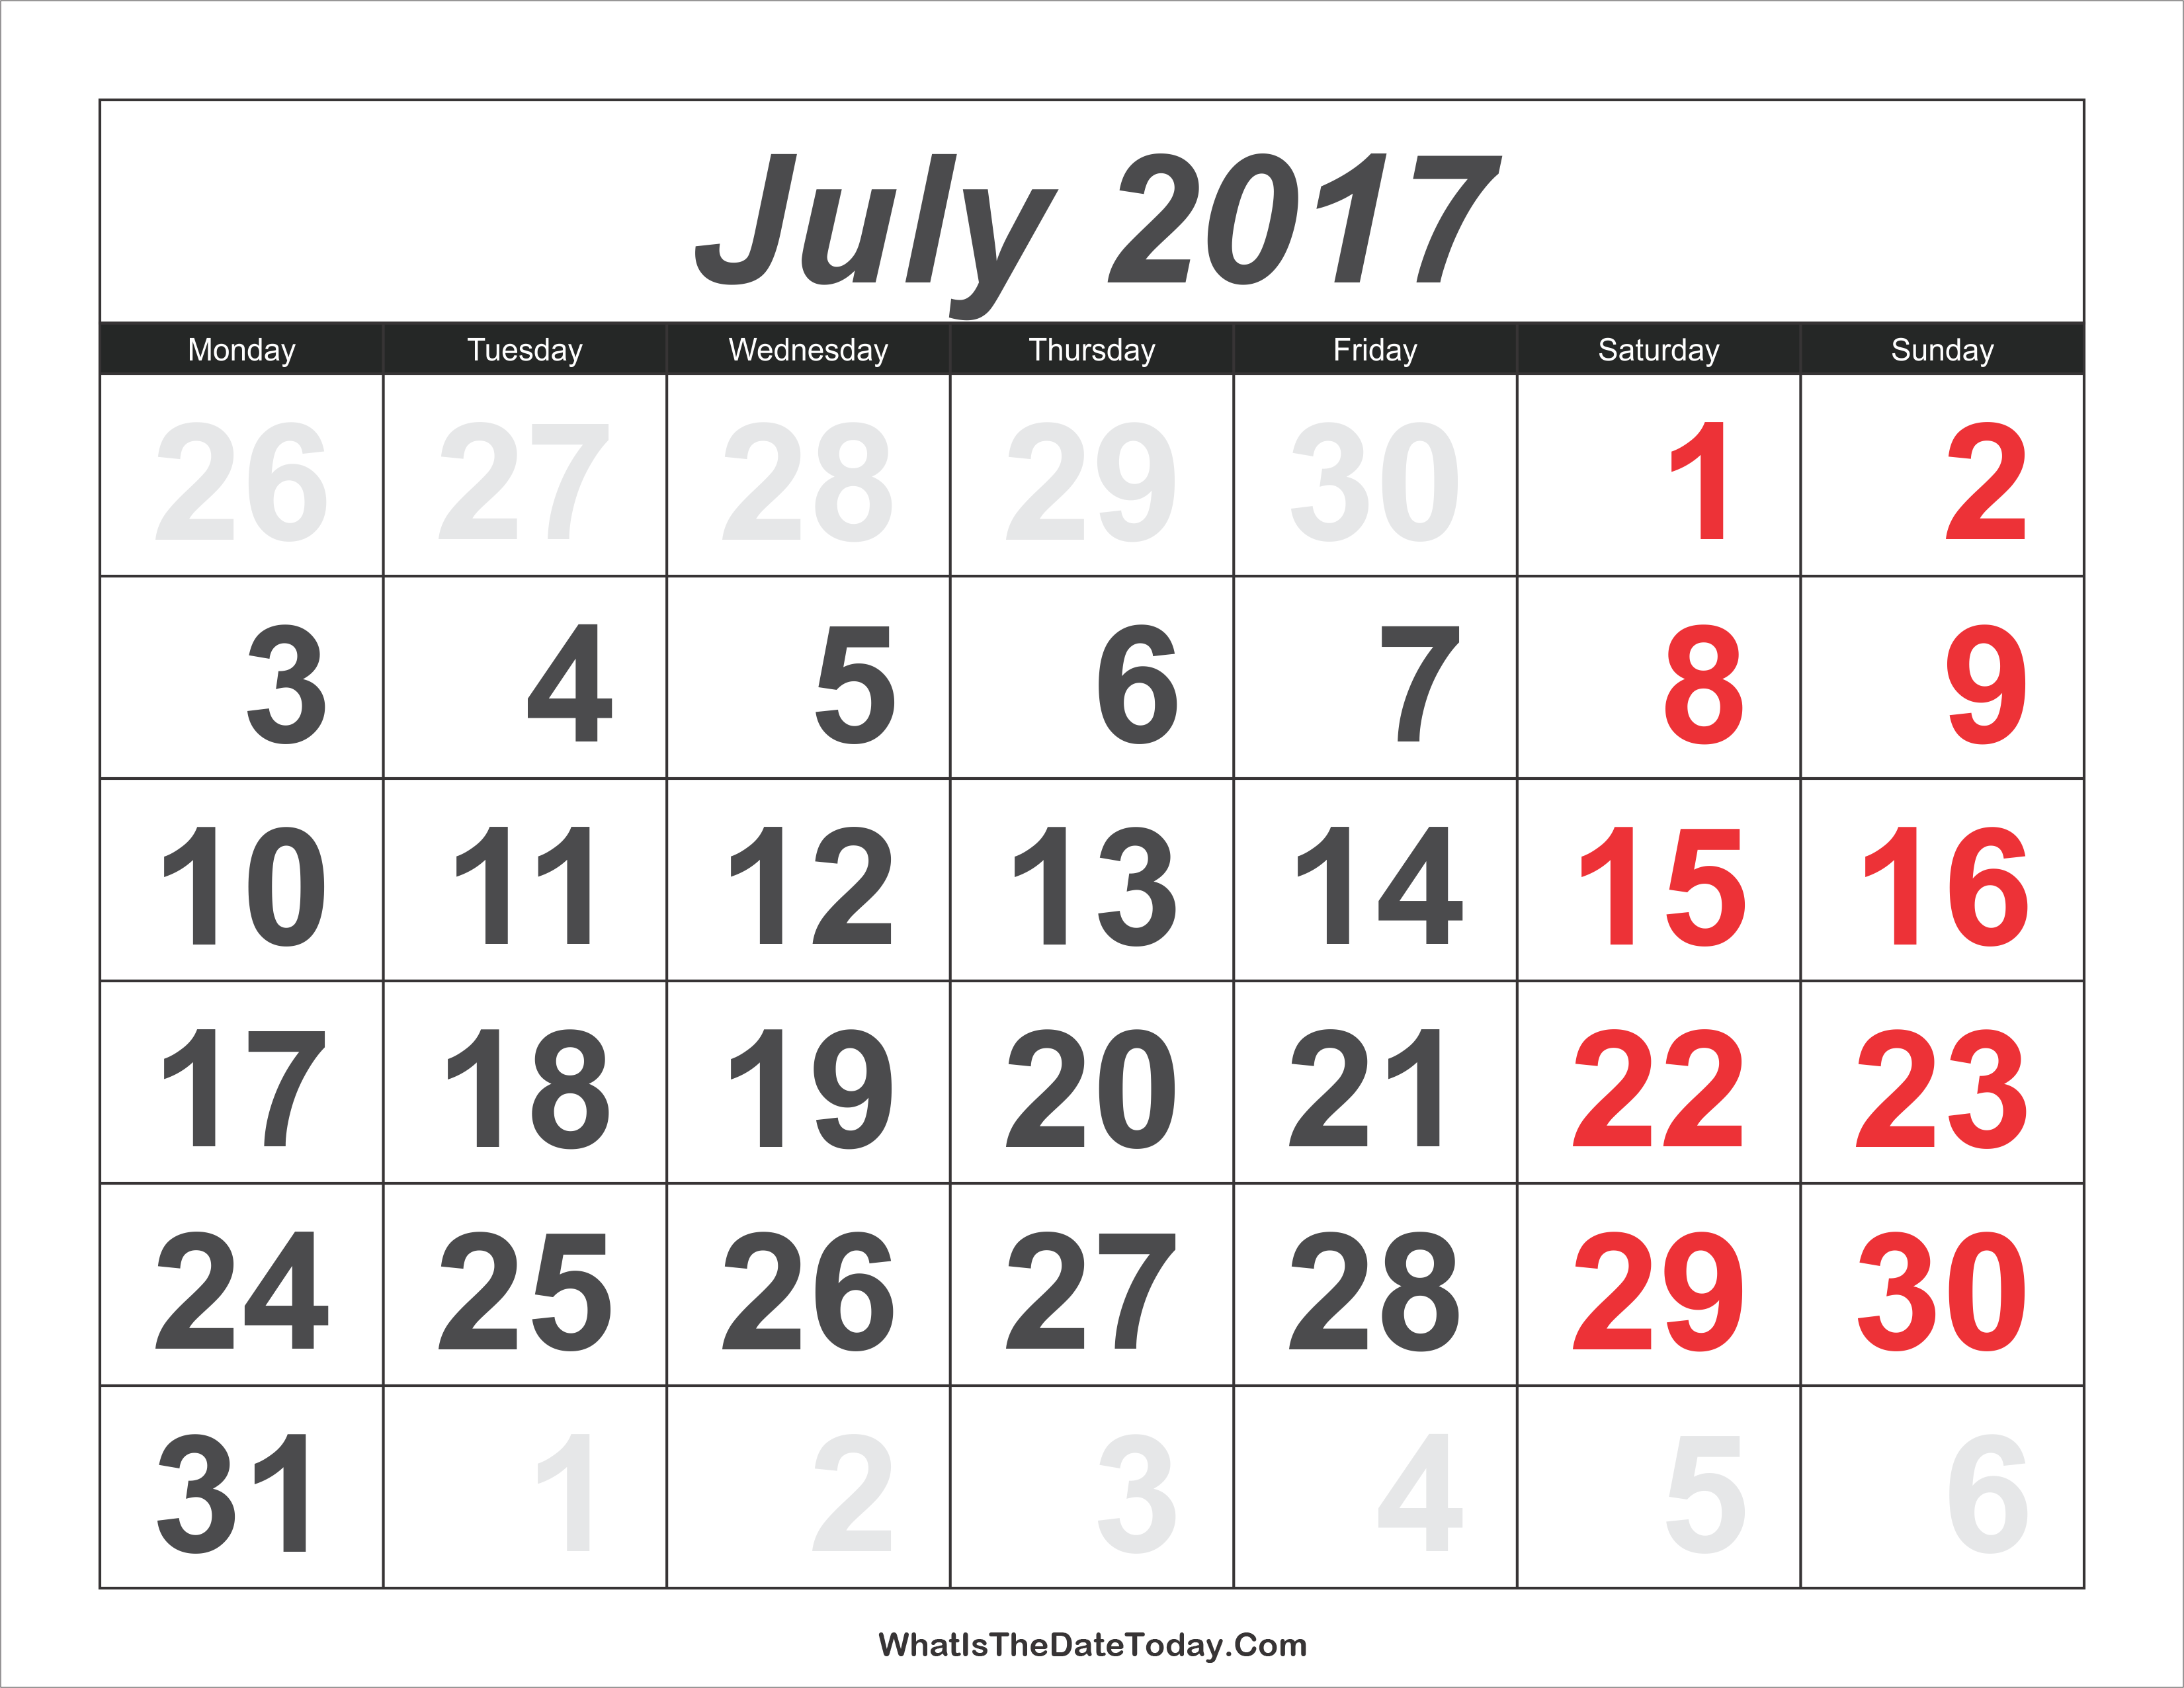 2017 Calendar July with Large Numbers  Whatisthedatetoday.Com